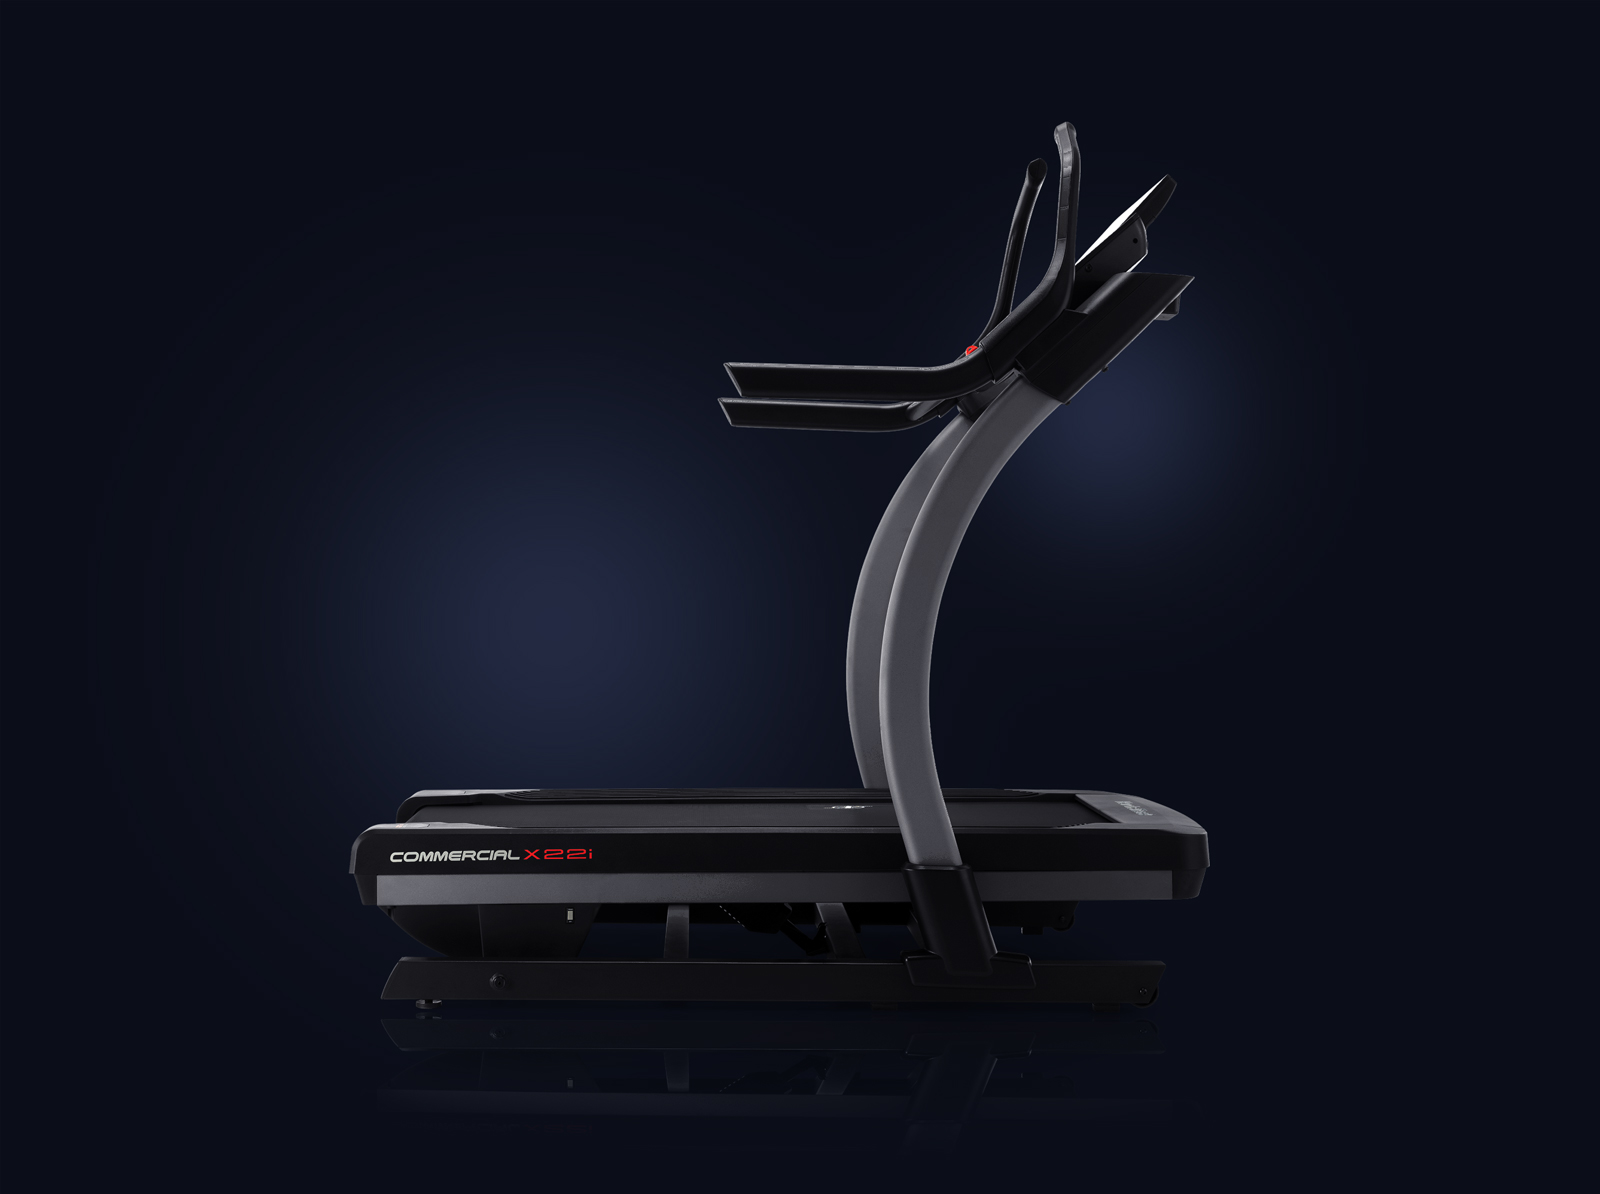 Profile view of the x22i treadmill on a dark blue gradient background